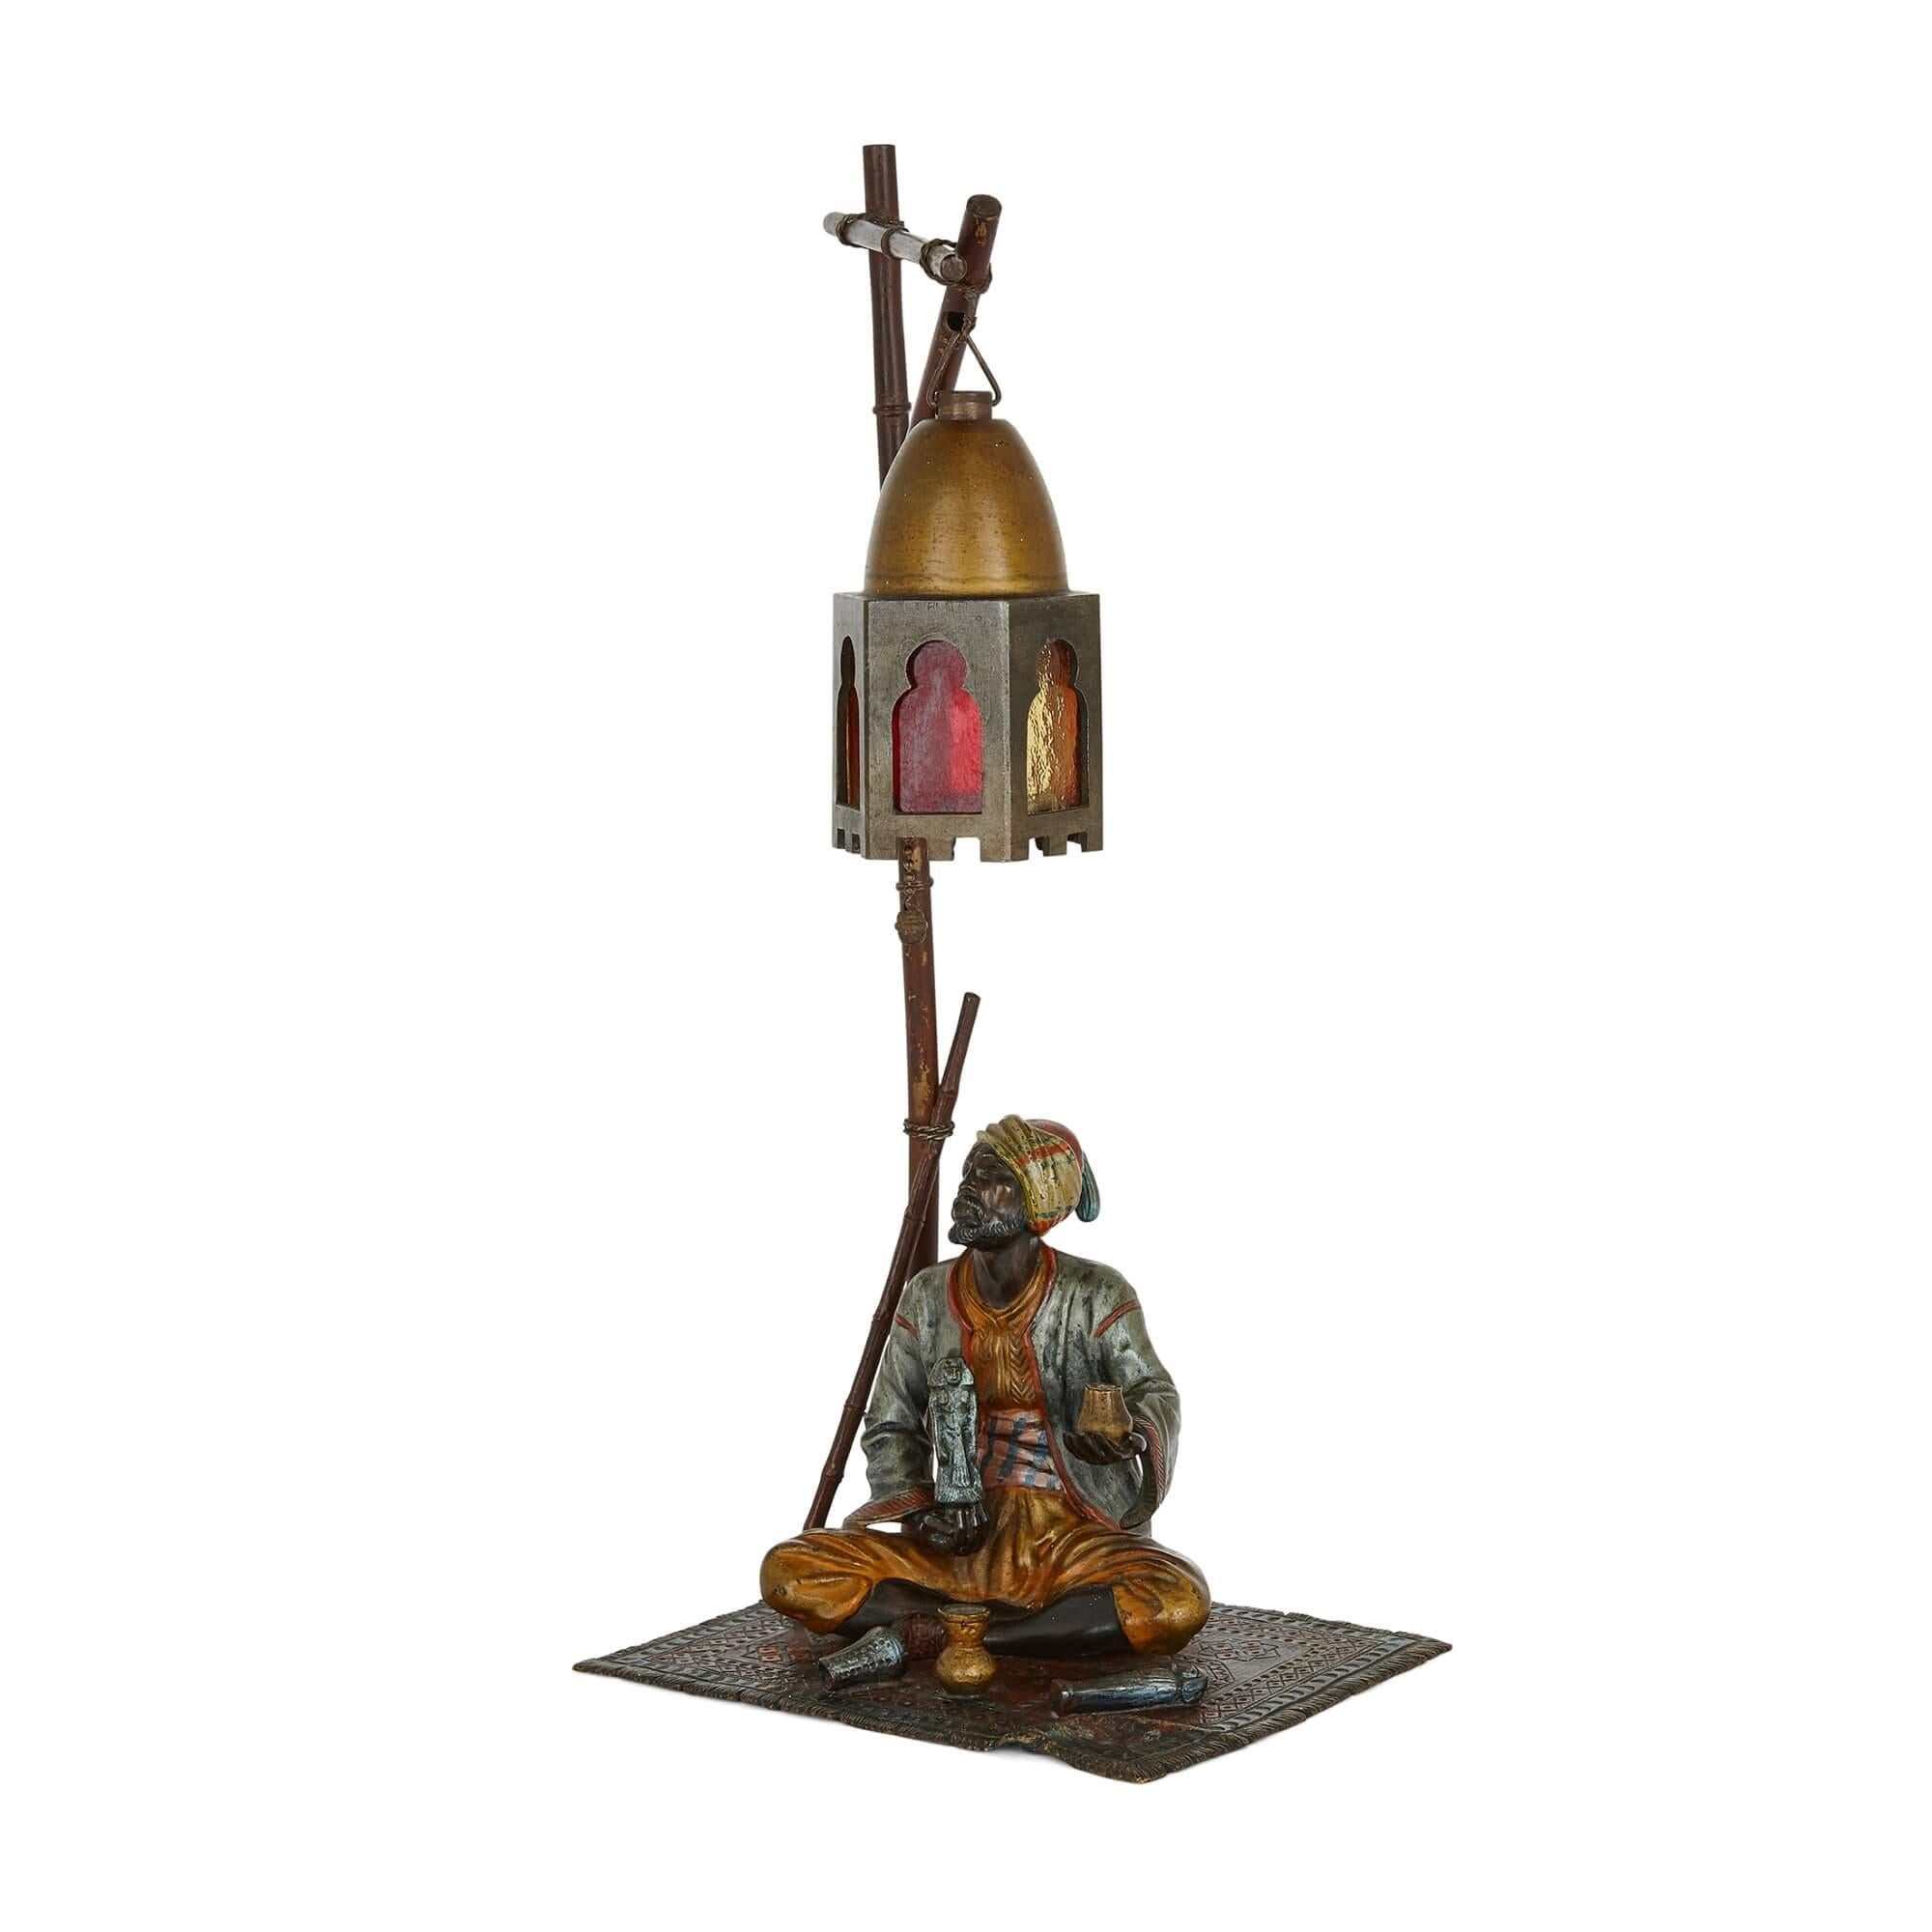 Viennese Orientalist cold-painted bronze figurative lamp
Austrian, c. 1910
Measures: Height 36cm, width 13cm, depth 16cm

This fine bronze lamp is crafted in the Viennese Orientalist manner that prevailed during the early twentieth century. The